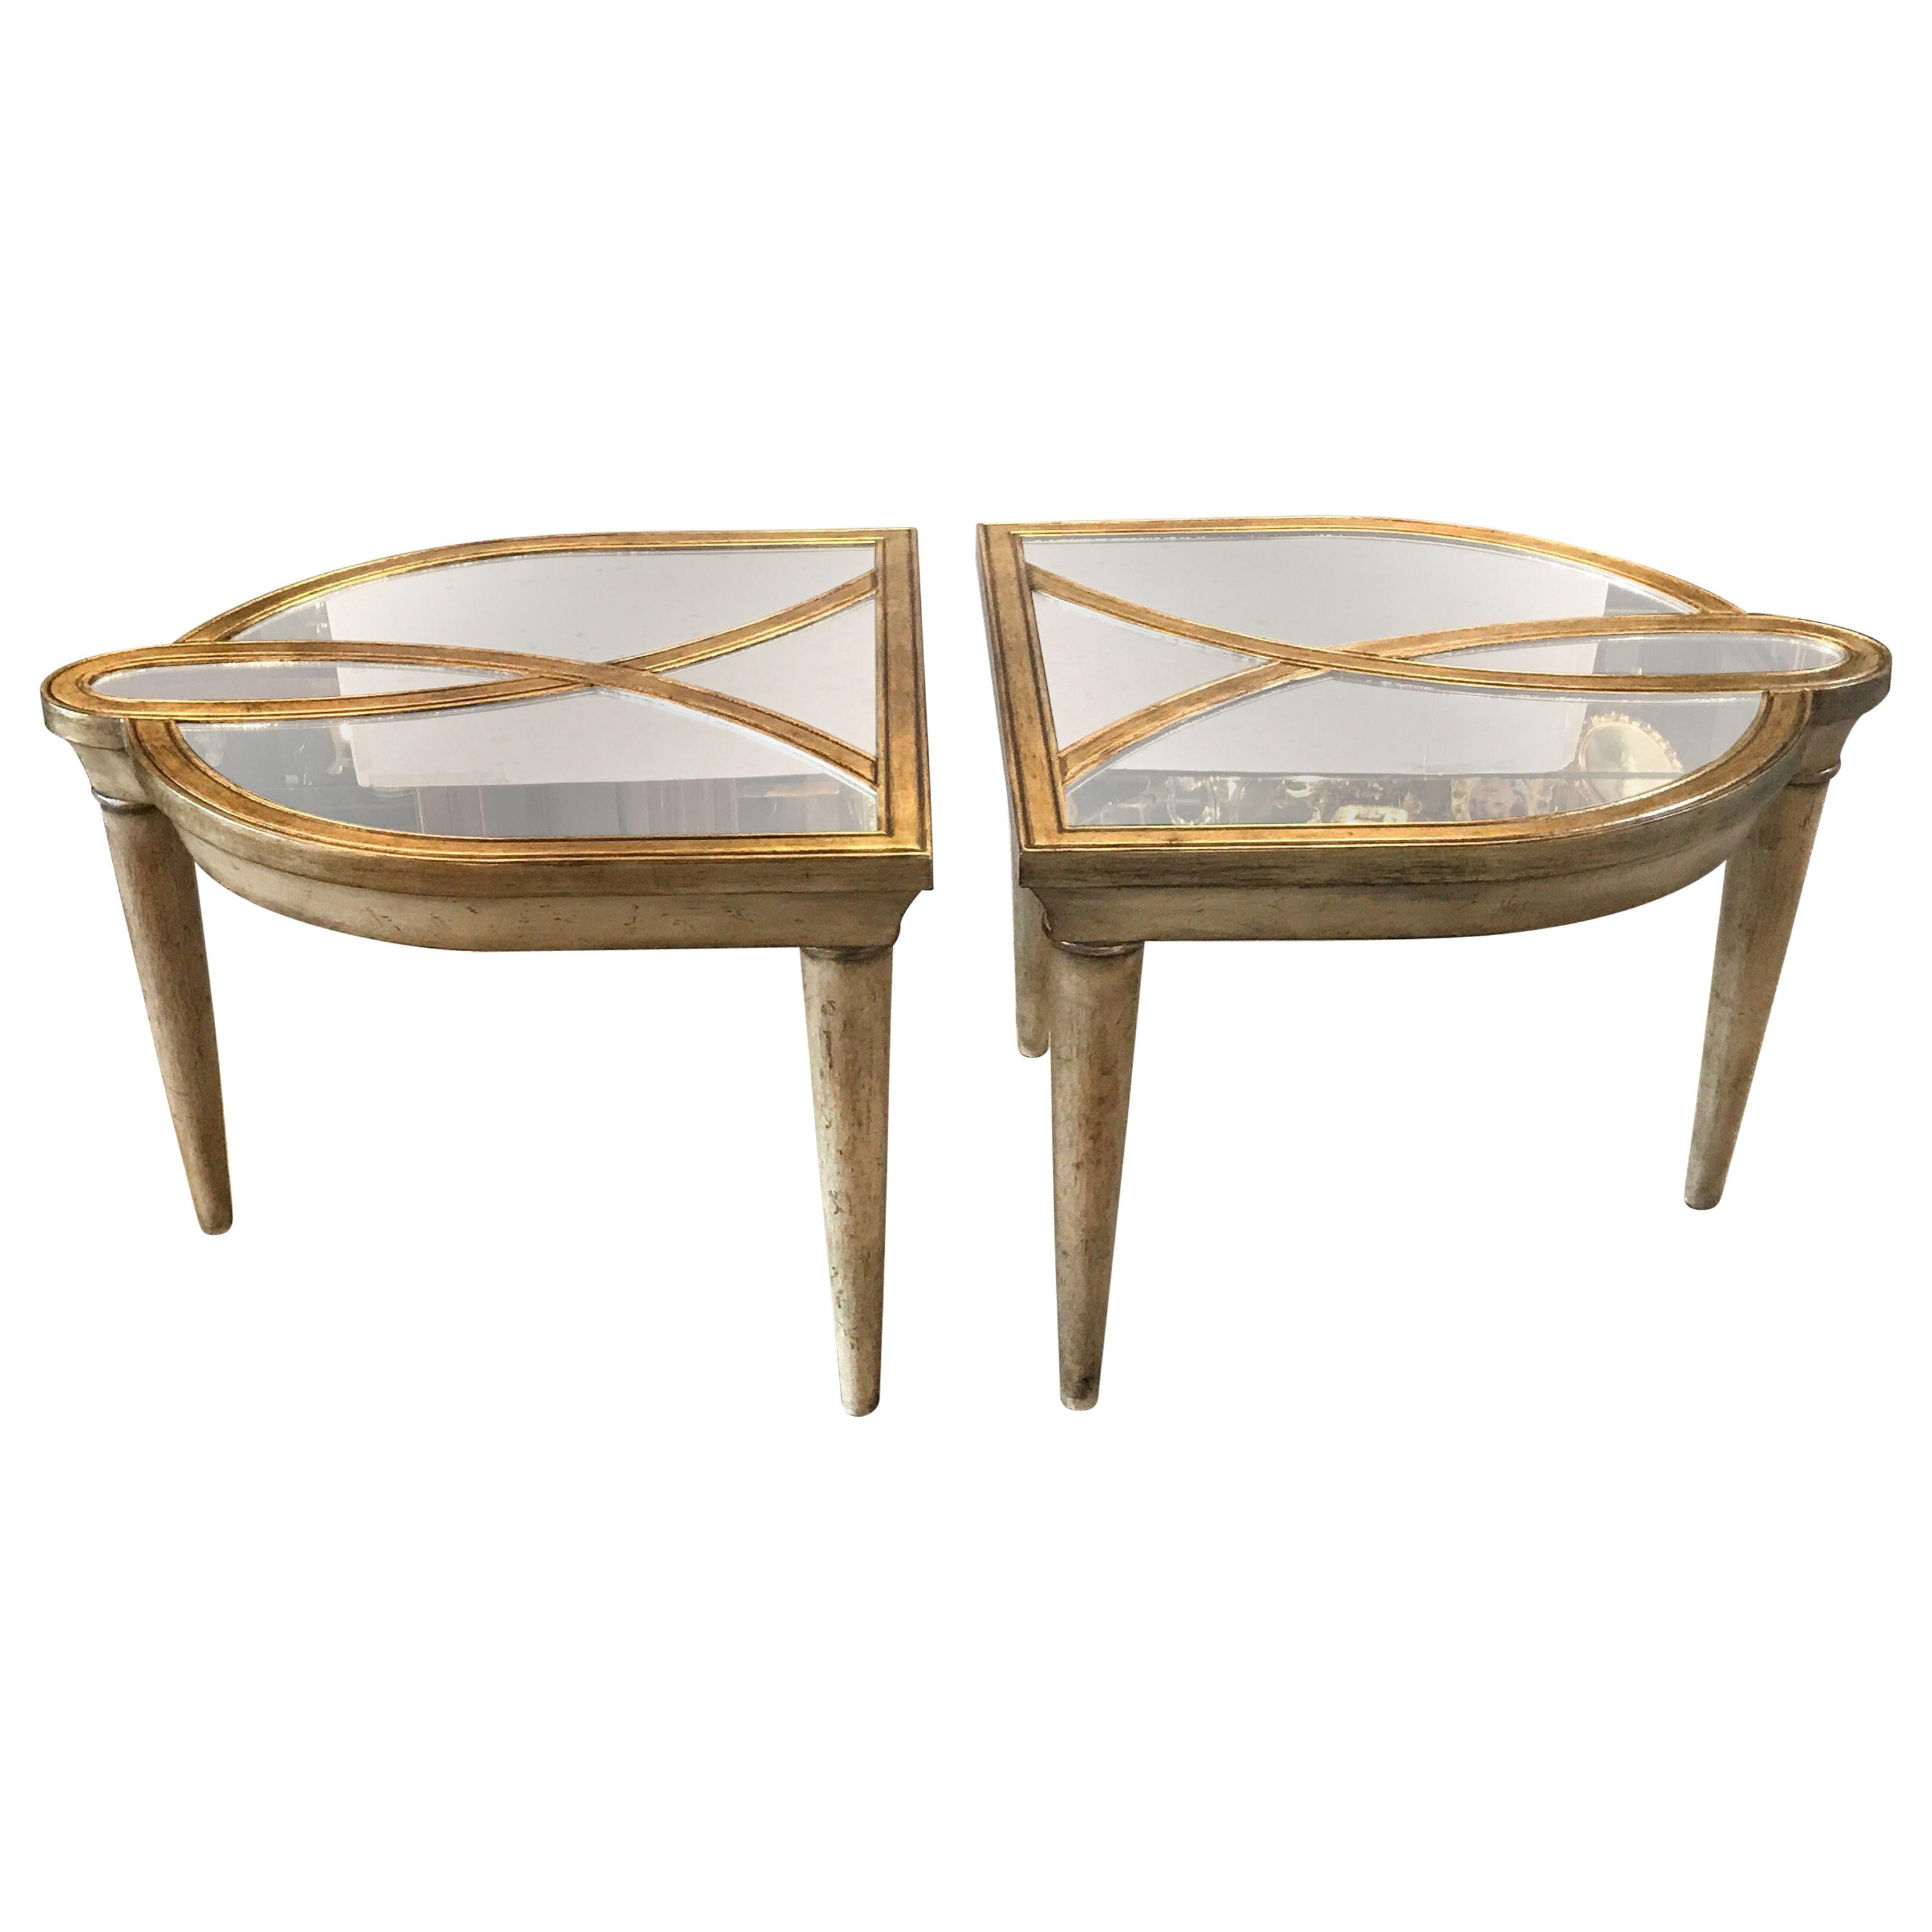 Hollywood Regency Style Two-Part Mirrored Cocktail Table